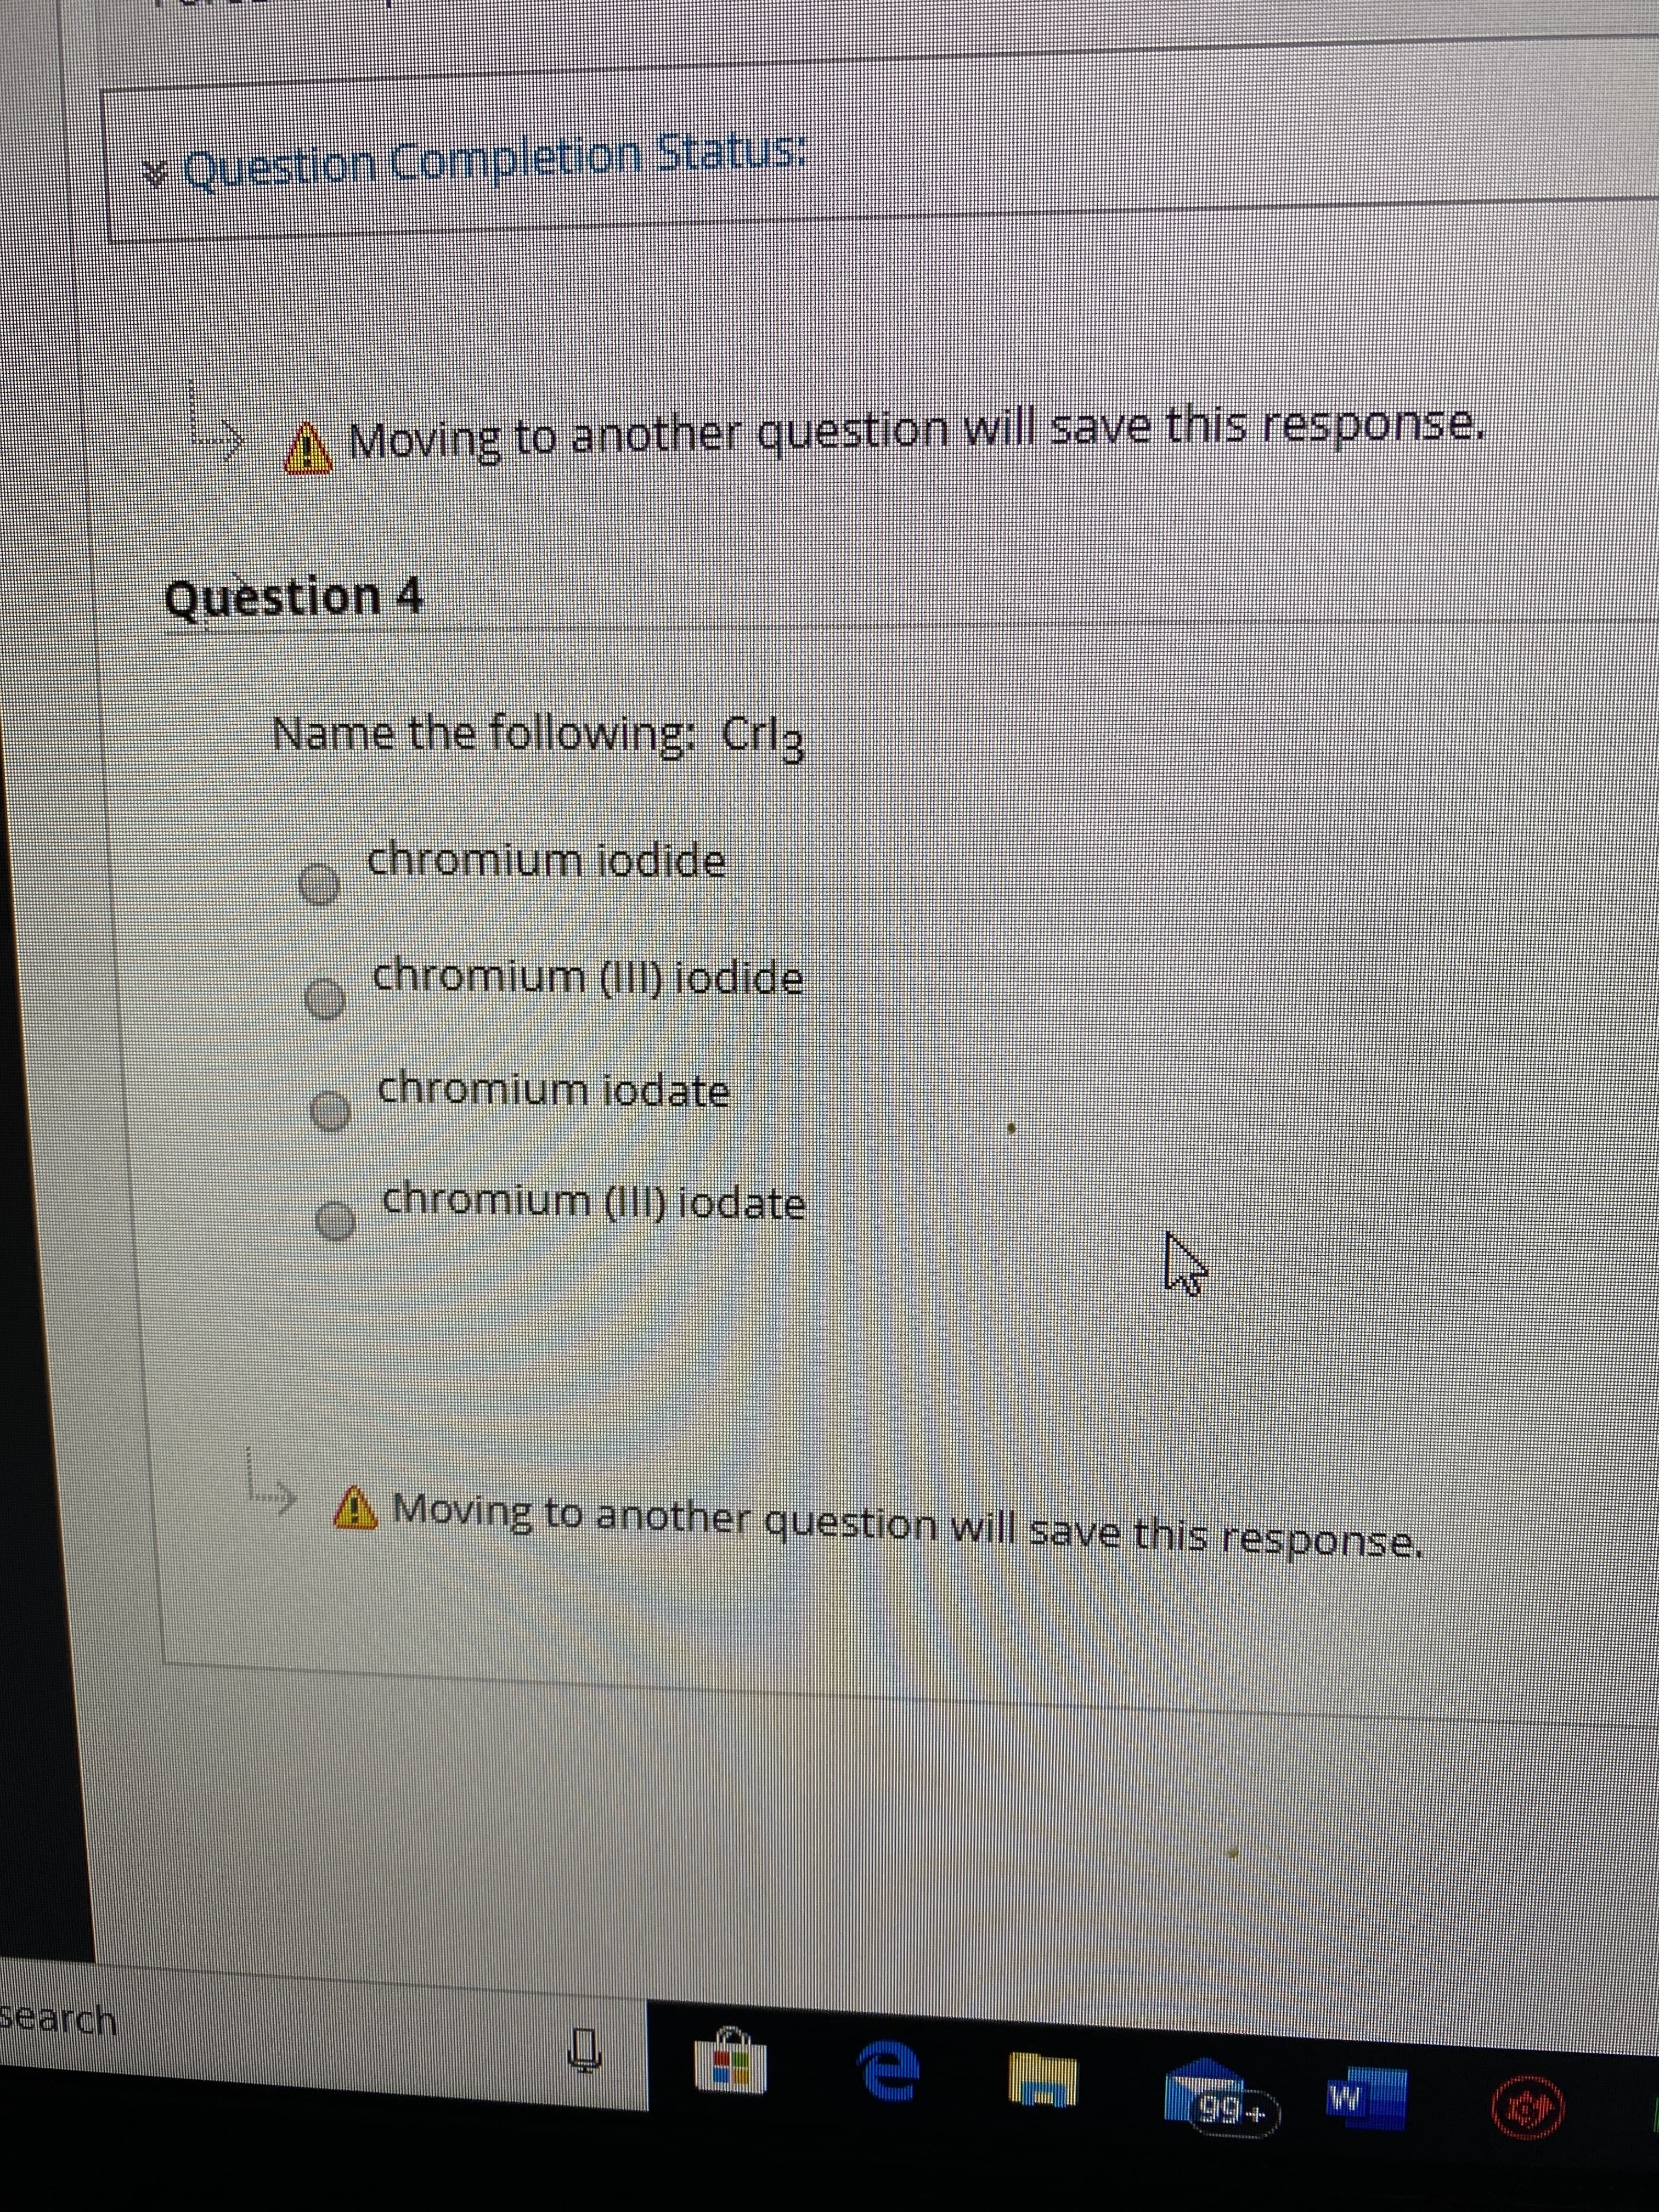 Y Question Completion Status:
A Moving to another question will save this response.
Question 4
Name the following: Crlg
chromium iodide
chromium (III) iodide
chromium iodate
chromium (III) iodate
L,
A Moving to another question will save this response.
search
99+
